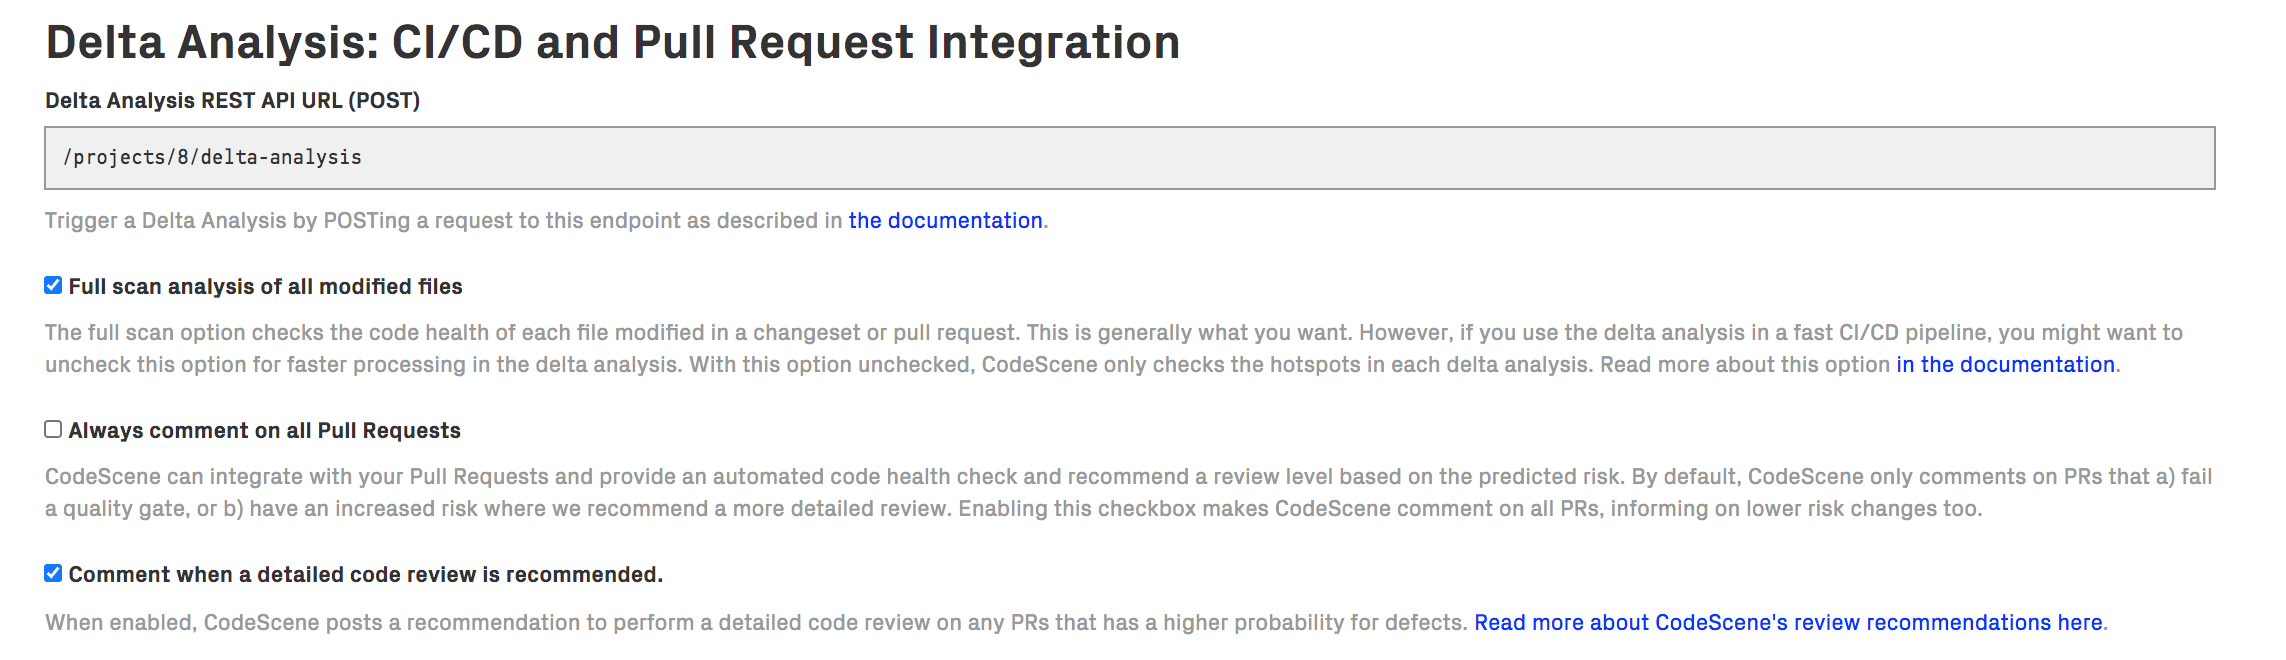 Configure how often you want CodeScene to comment on your PRs.